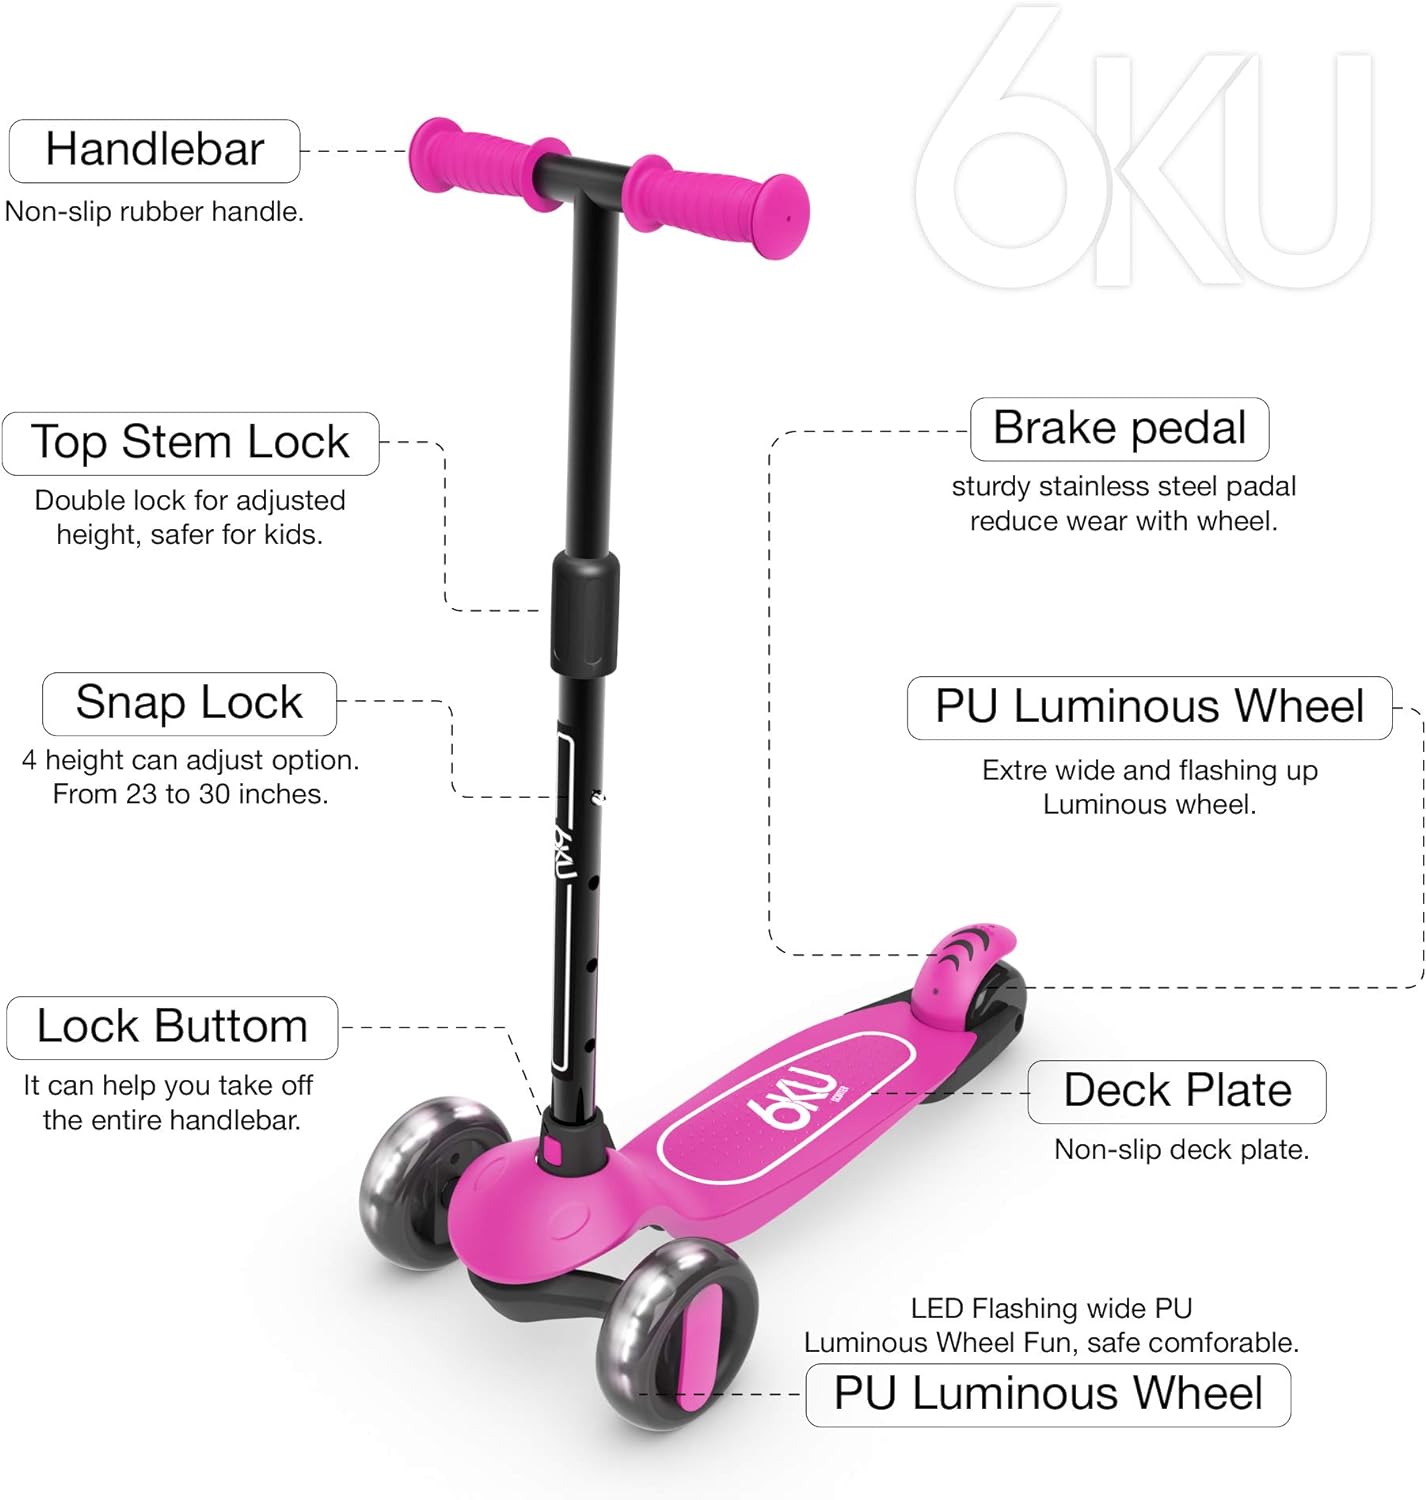 6KU Scooter for Kids Ages 3-5: A Fun and Safe Ride for Your Little Ones